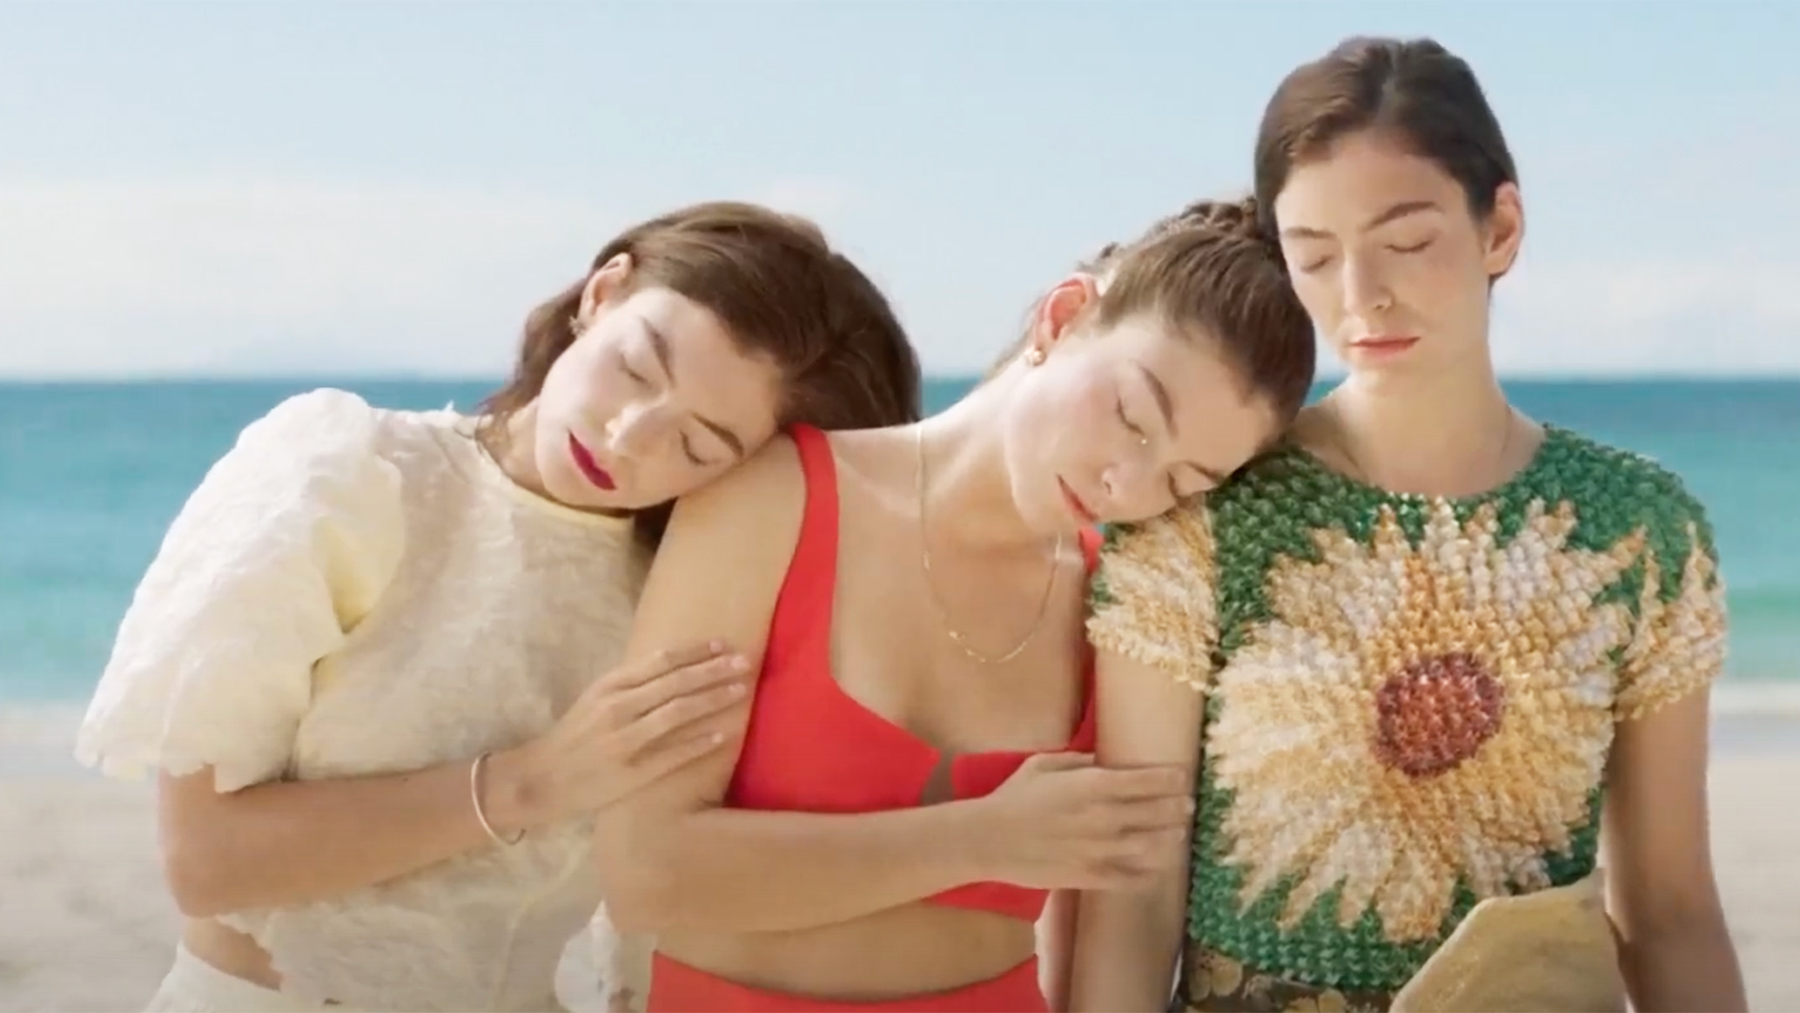 Three versions of Lorde Hit the Beach in a New Video